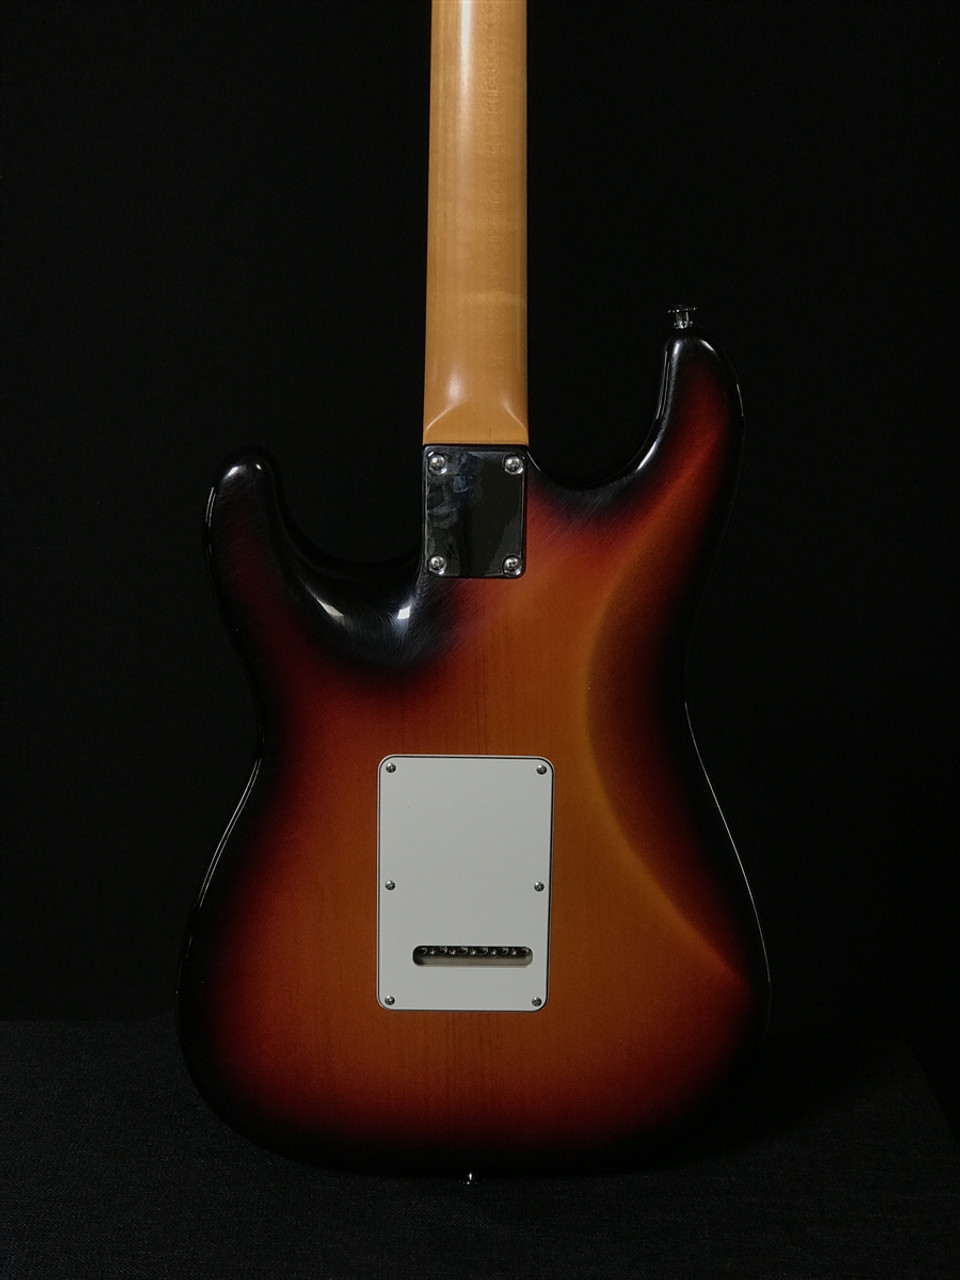 Suhr Classic S Antique in 3-Tone Sunburst with SSS Pickup Configuration and Maple Fretboard